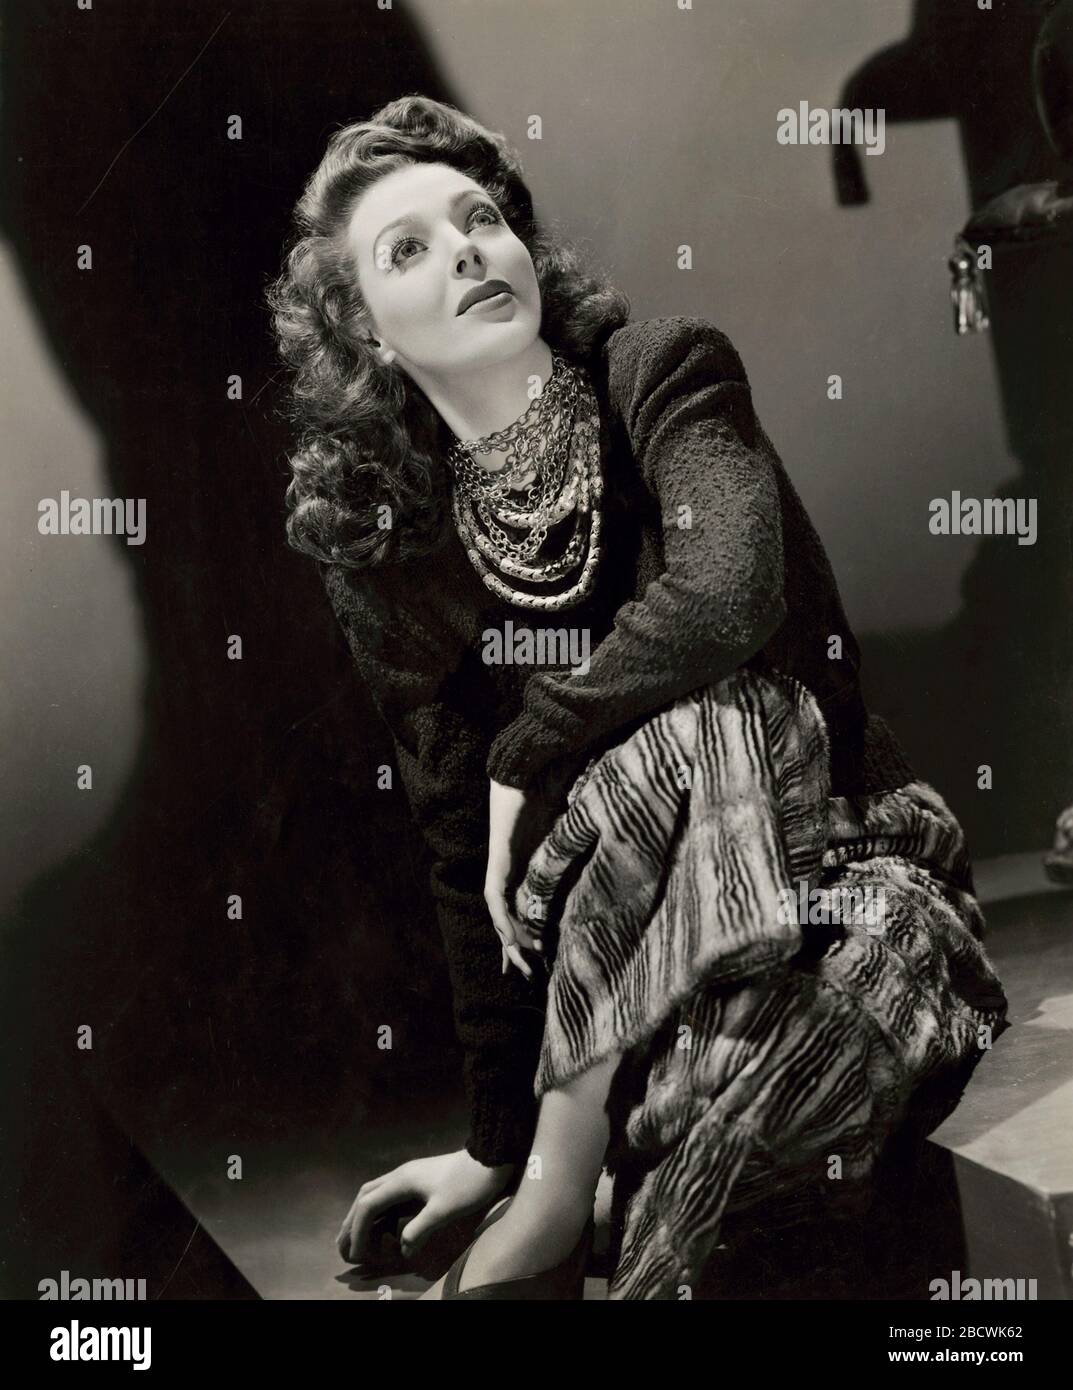 Loretta Young, "A Night to Remember" (1942) Columbia Pictures / Foto von George Hurrell File Reference # 33962-388THA Stockfoto